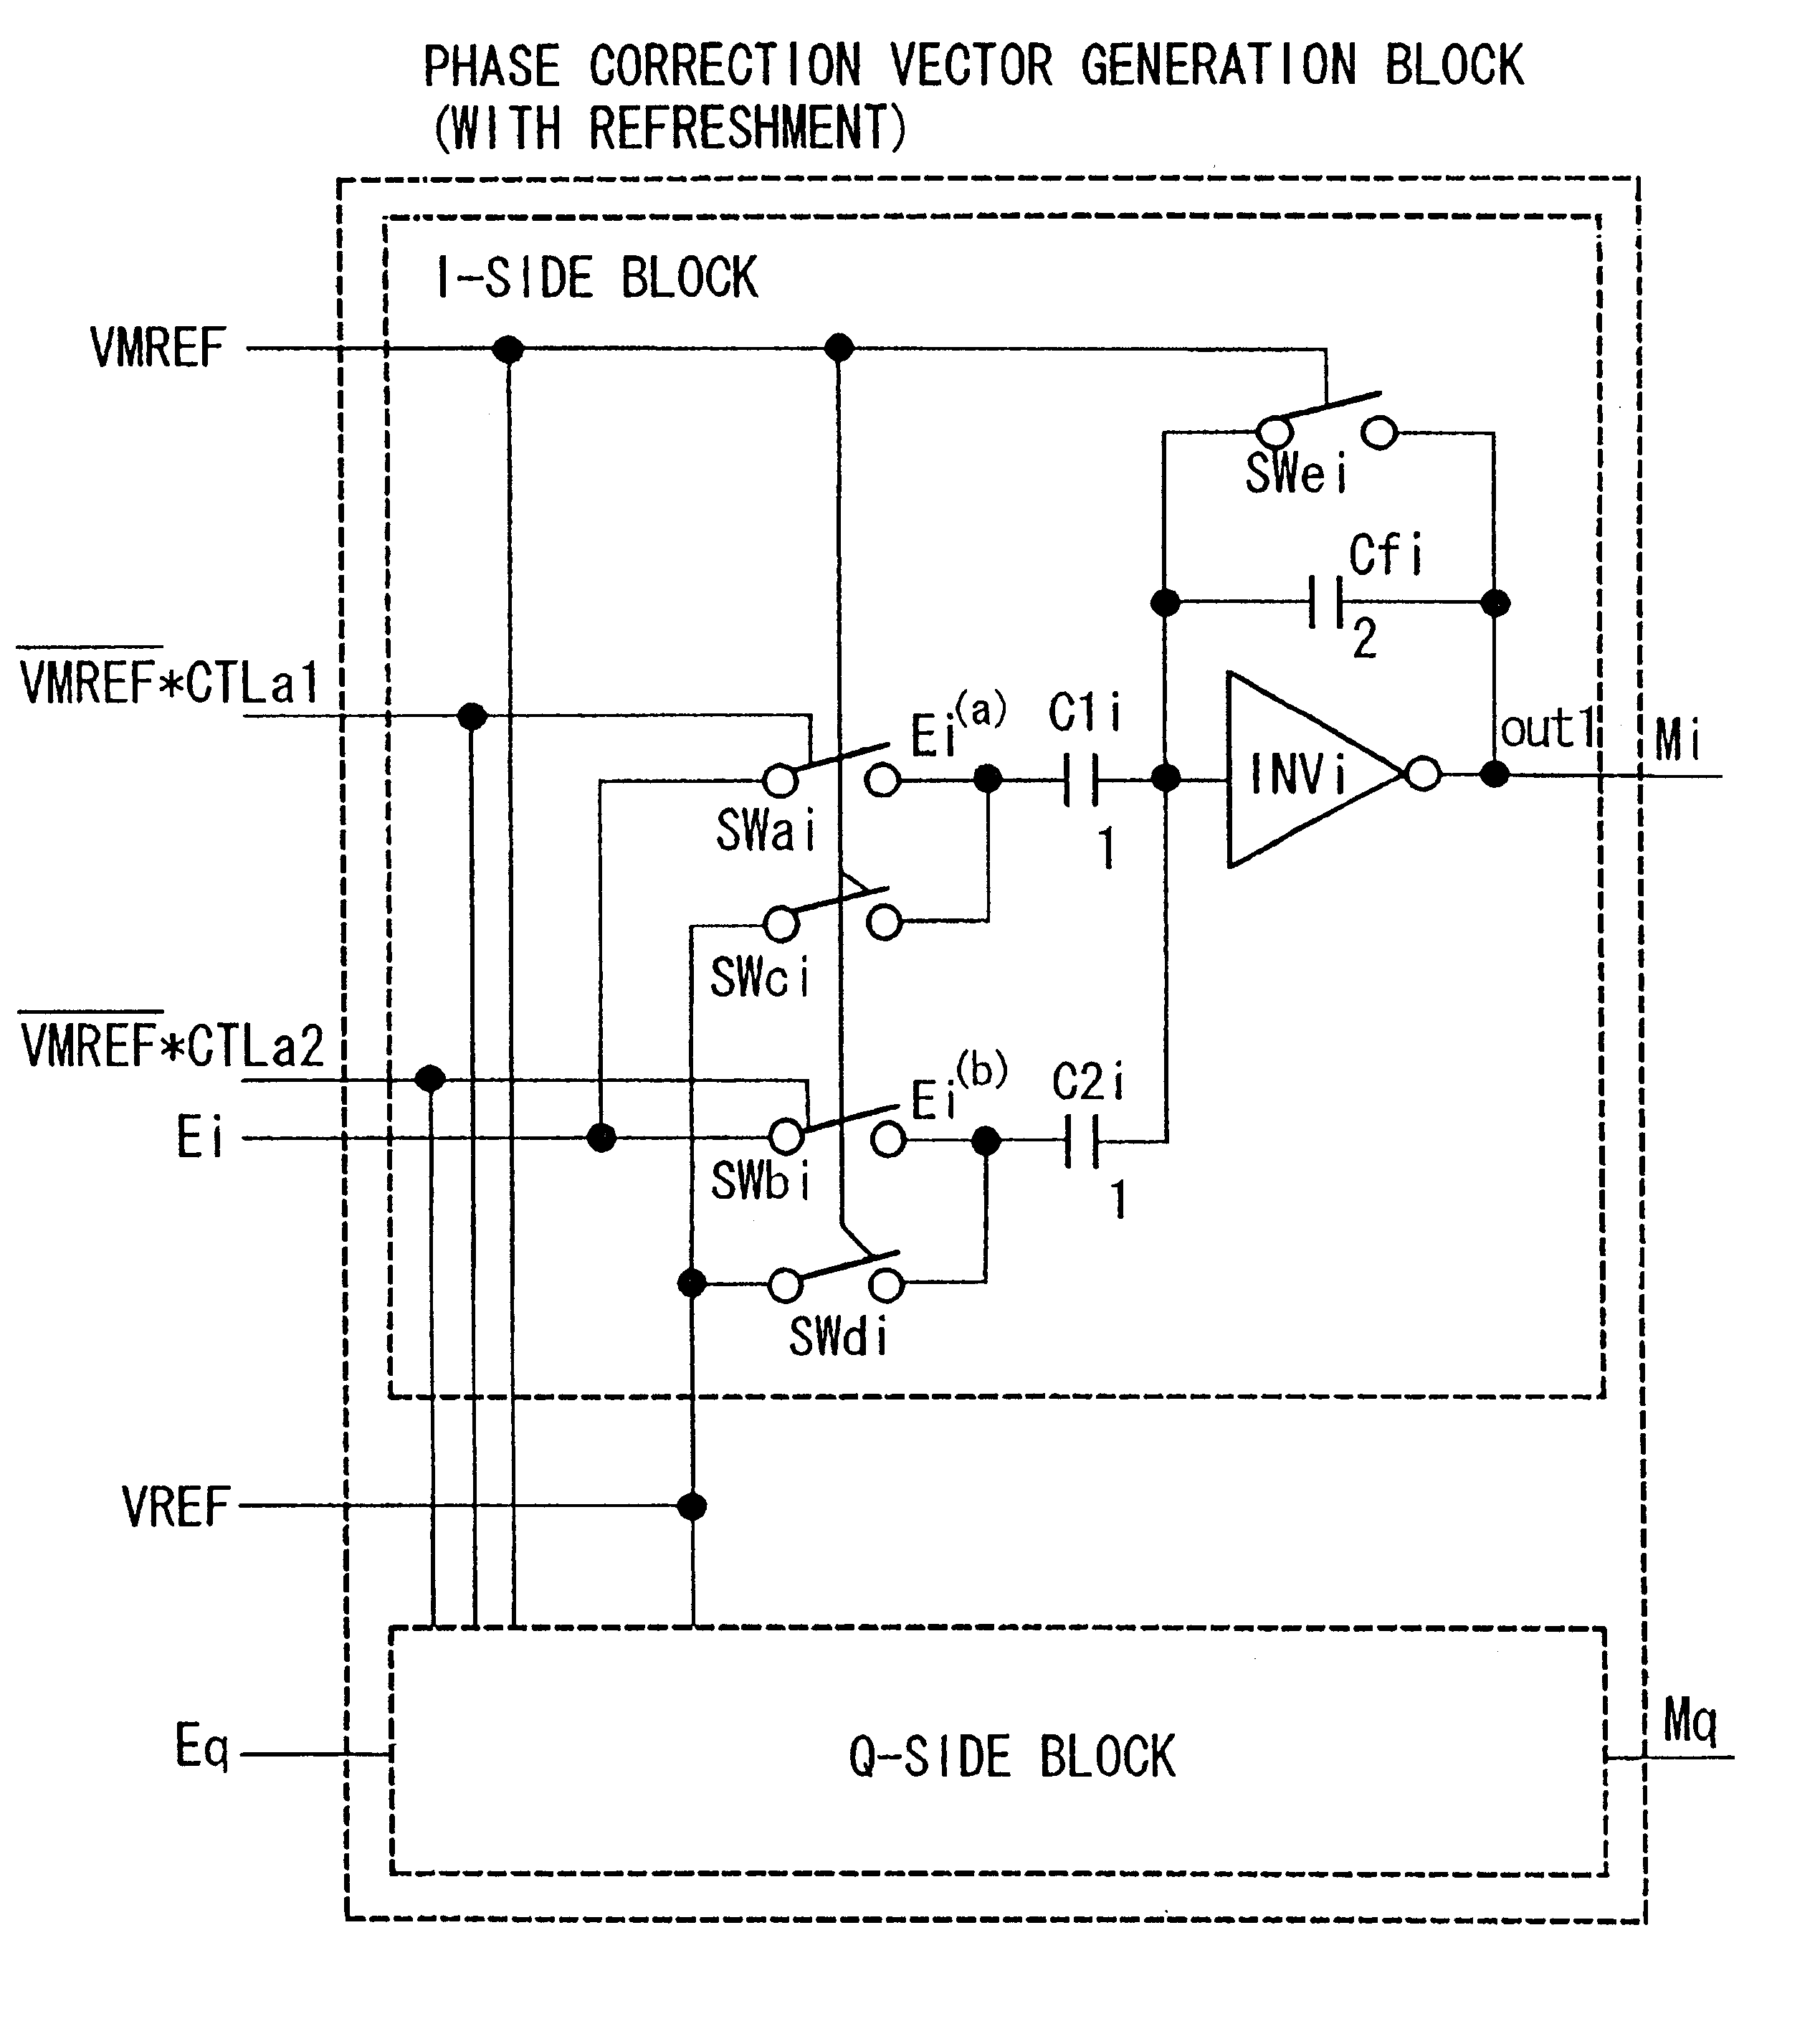 Receiver in a spread spectrum communication system having low power analog multipliers and adders